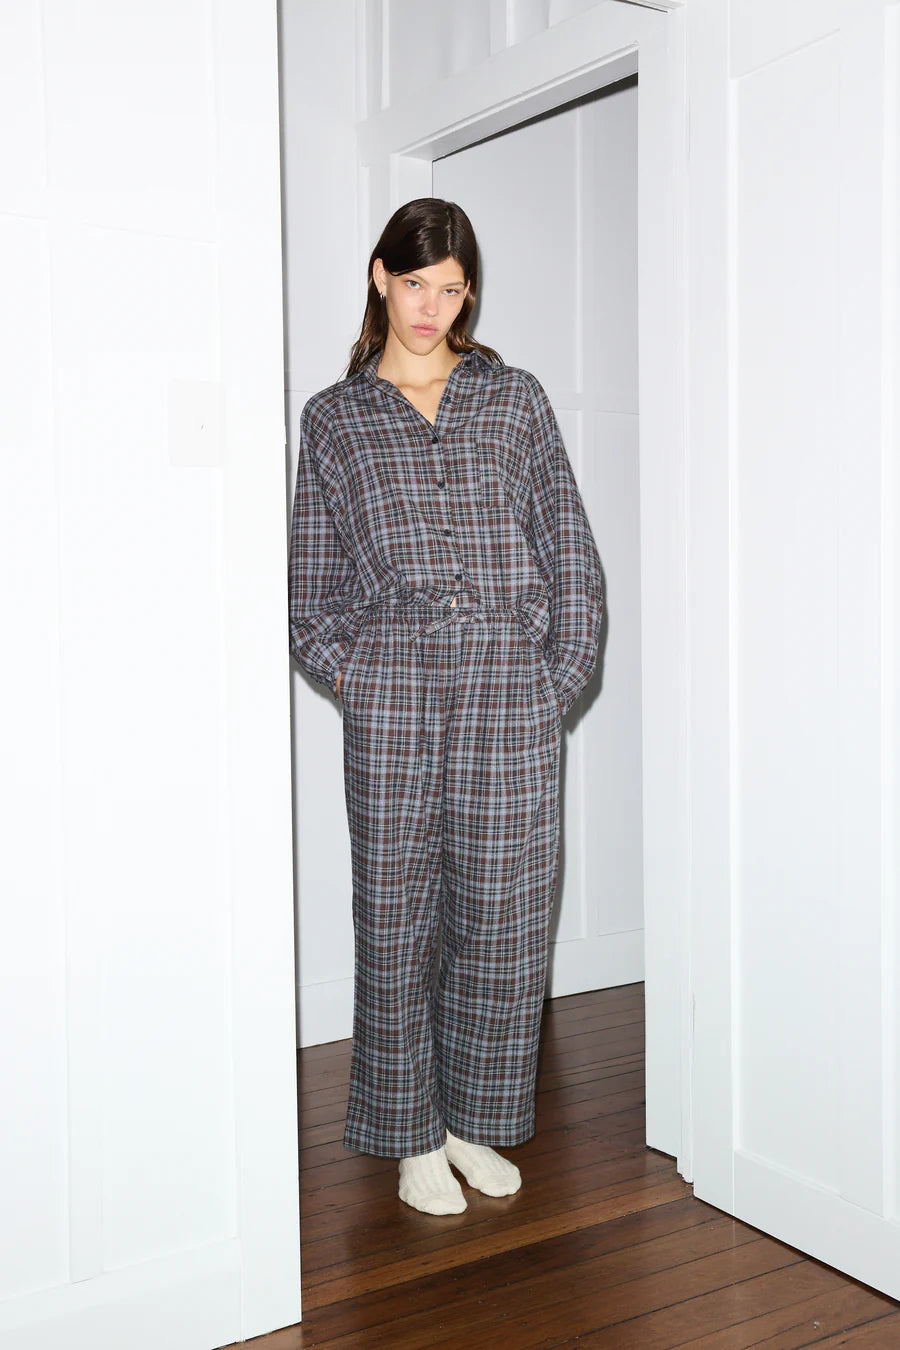 Our Flannel Set